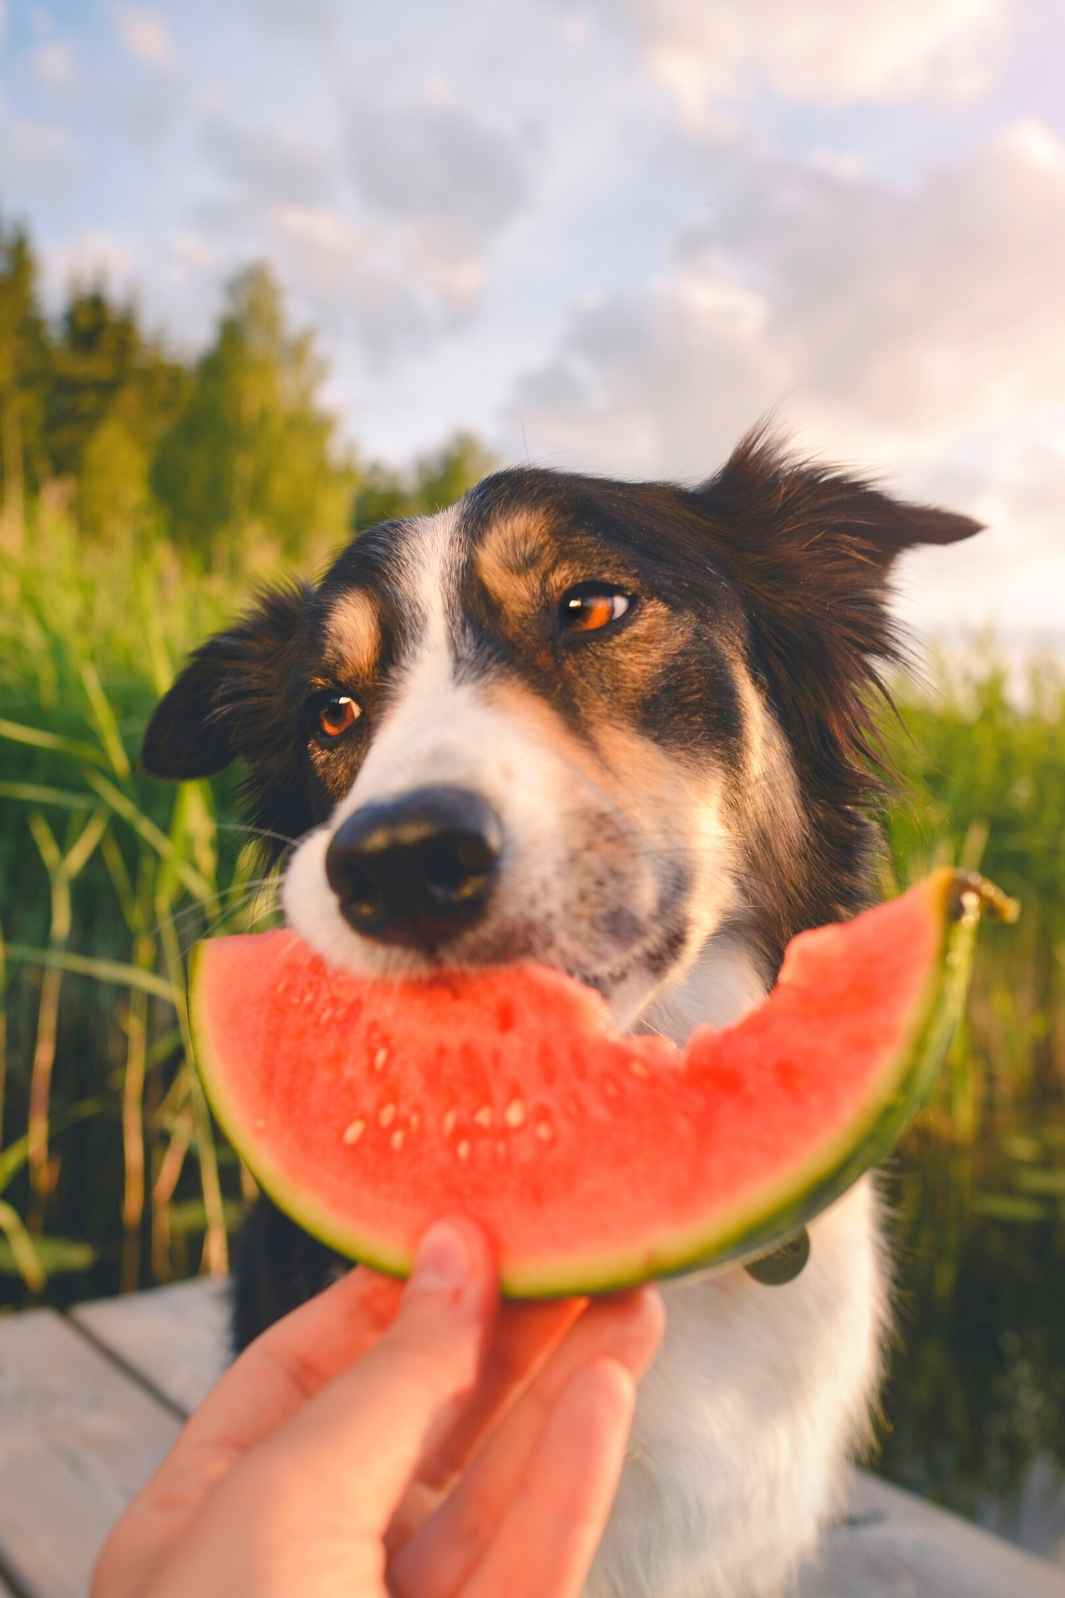 Adorable Collie eating a delicious watermelon on a hot summer day.